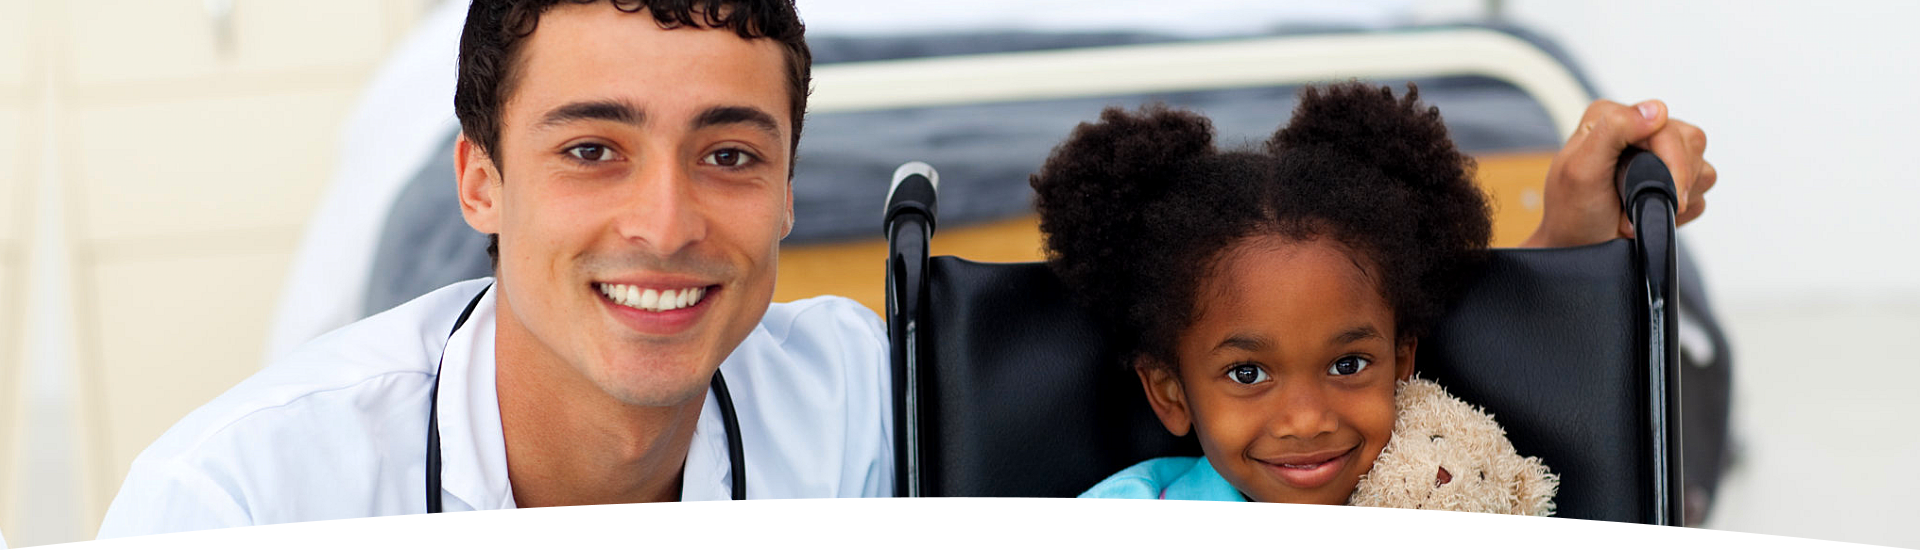 doctor sitting beside a child in a wheelchair